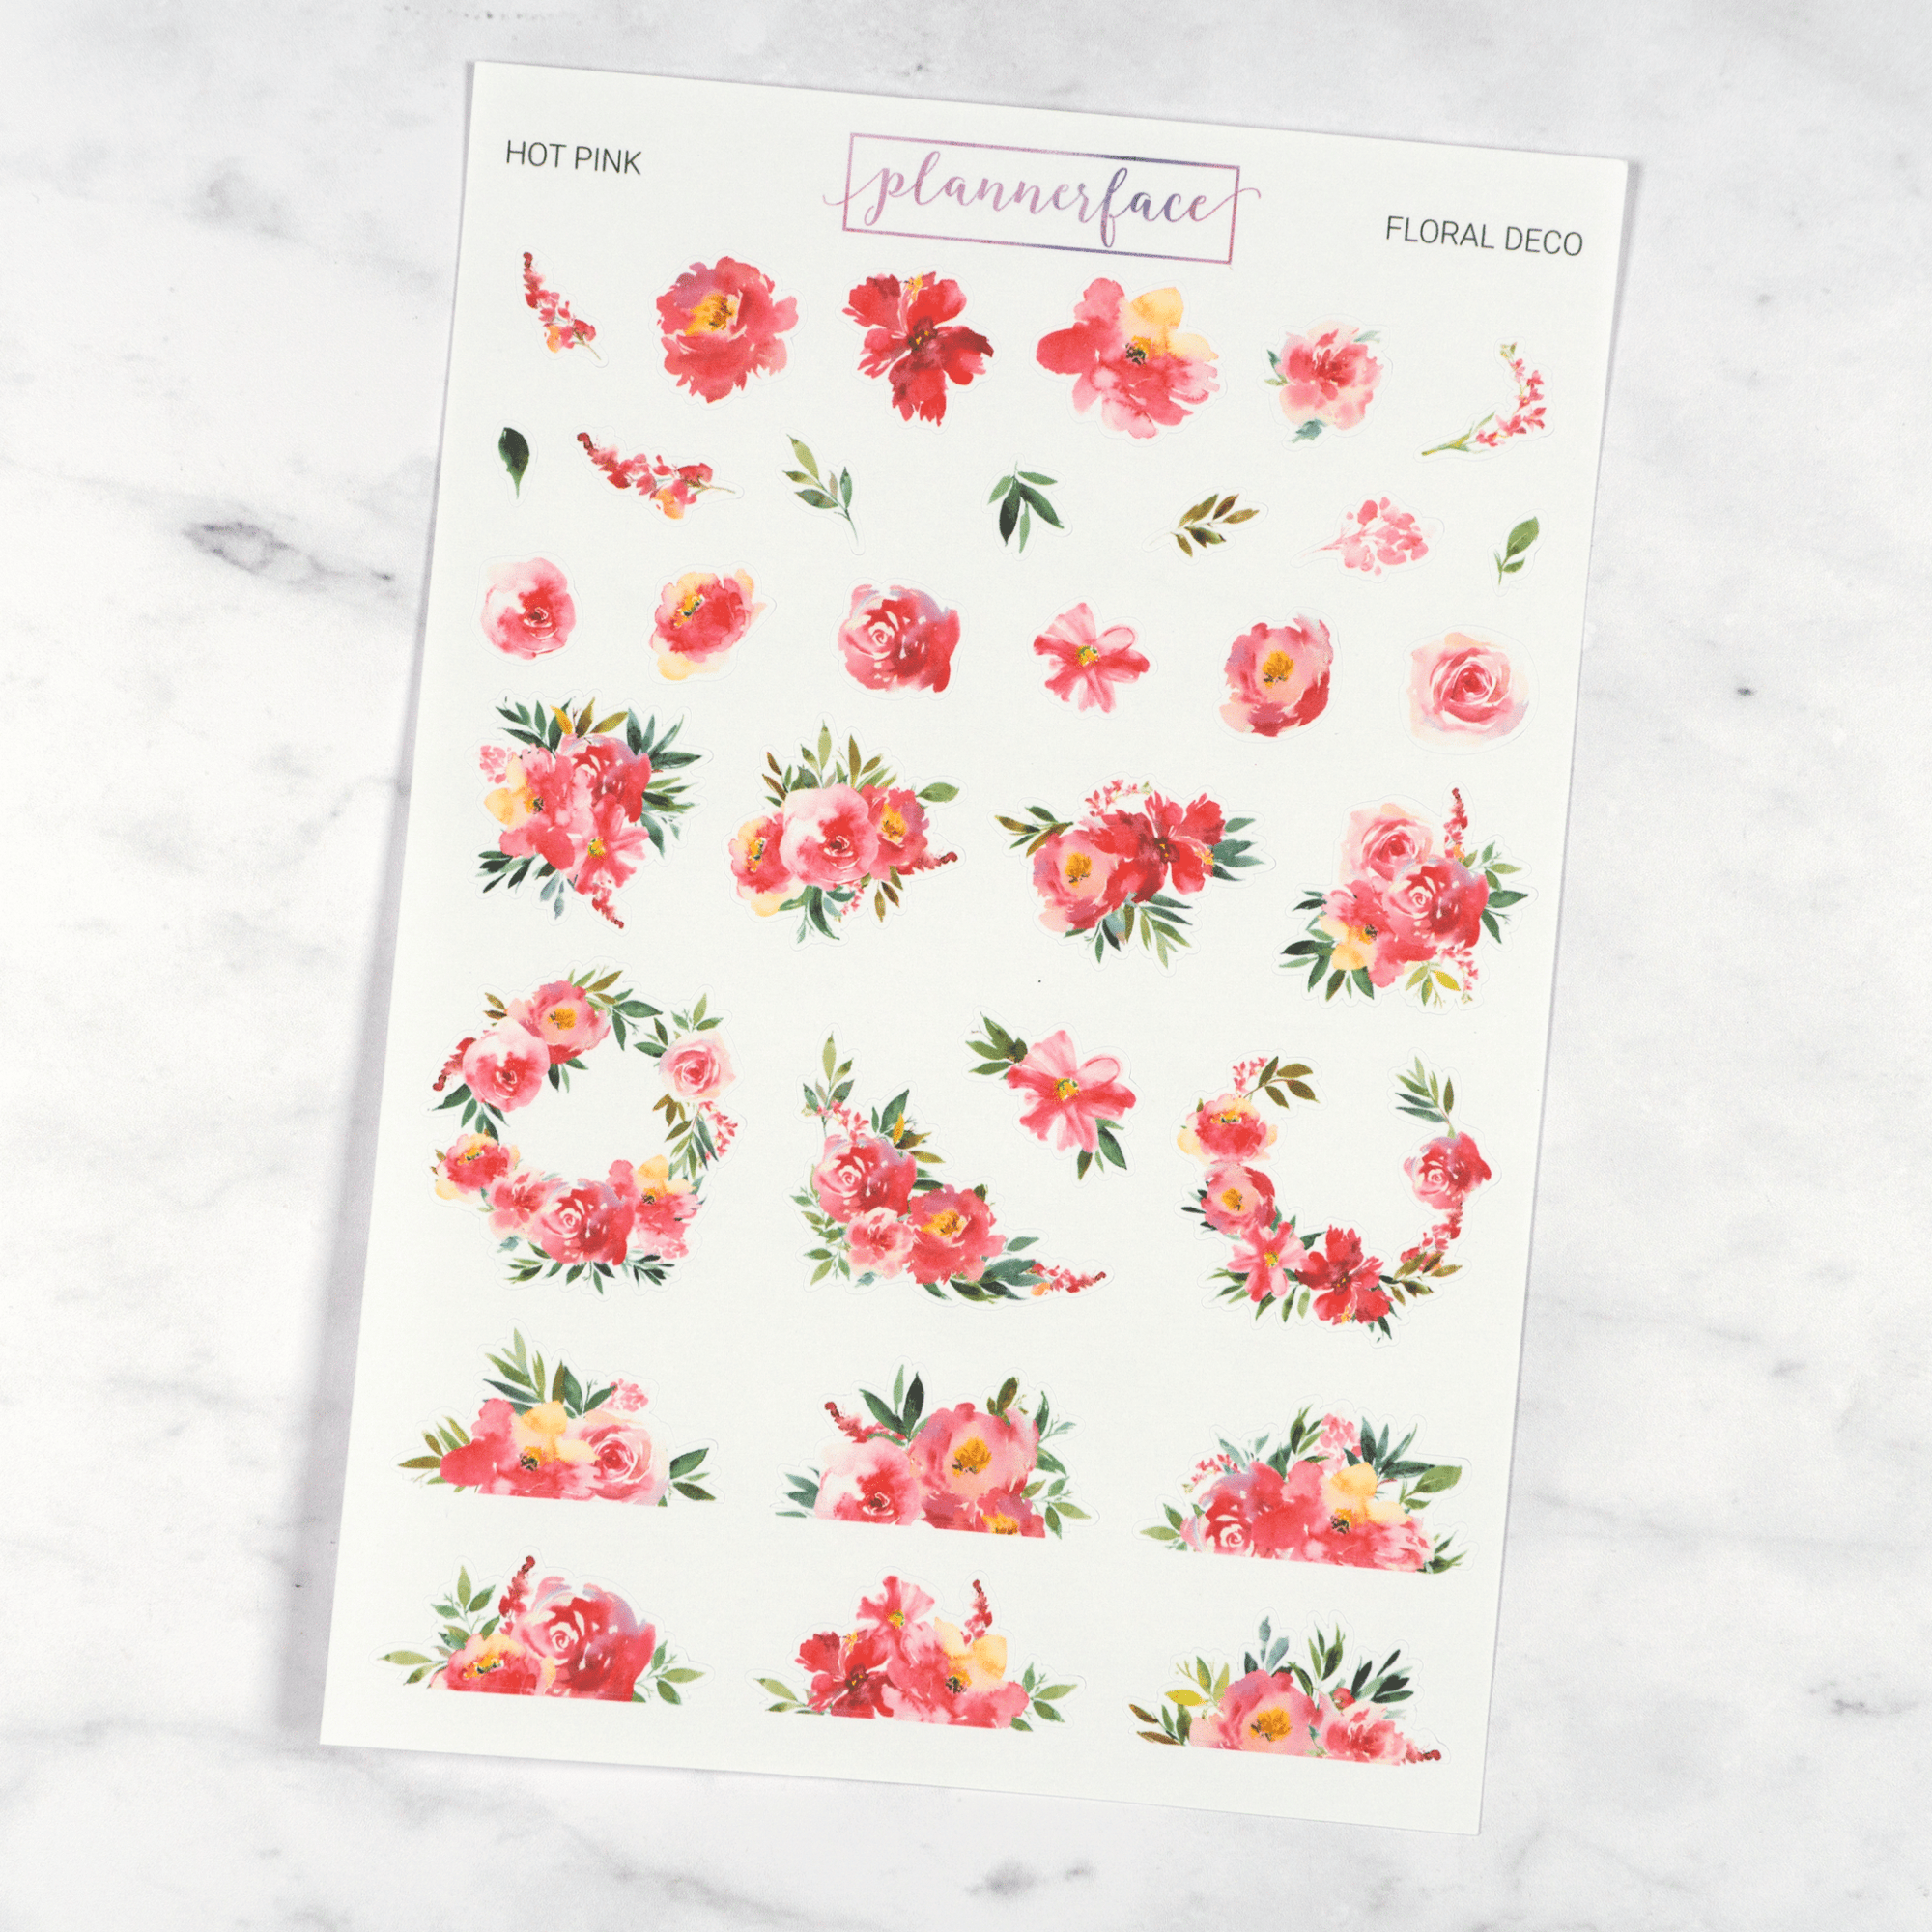 Hot Pink Floral Deco | Multicolour by Plannerface